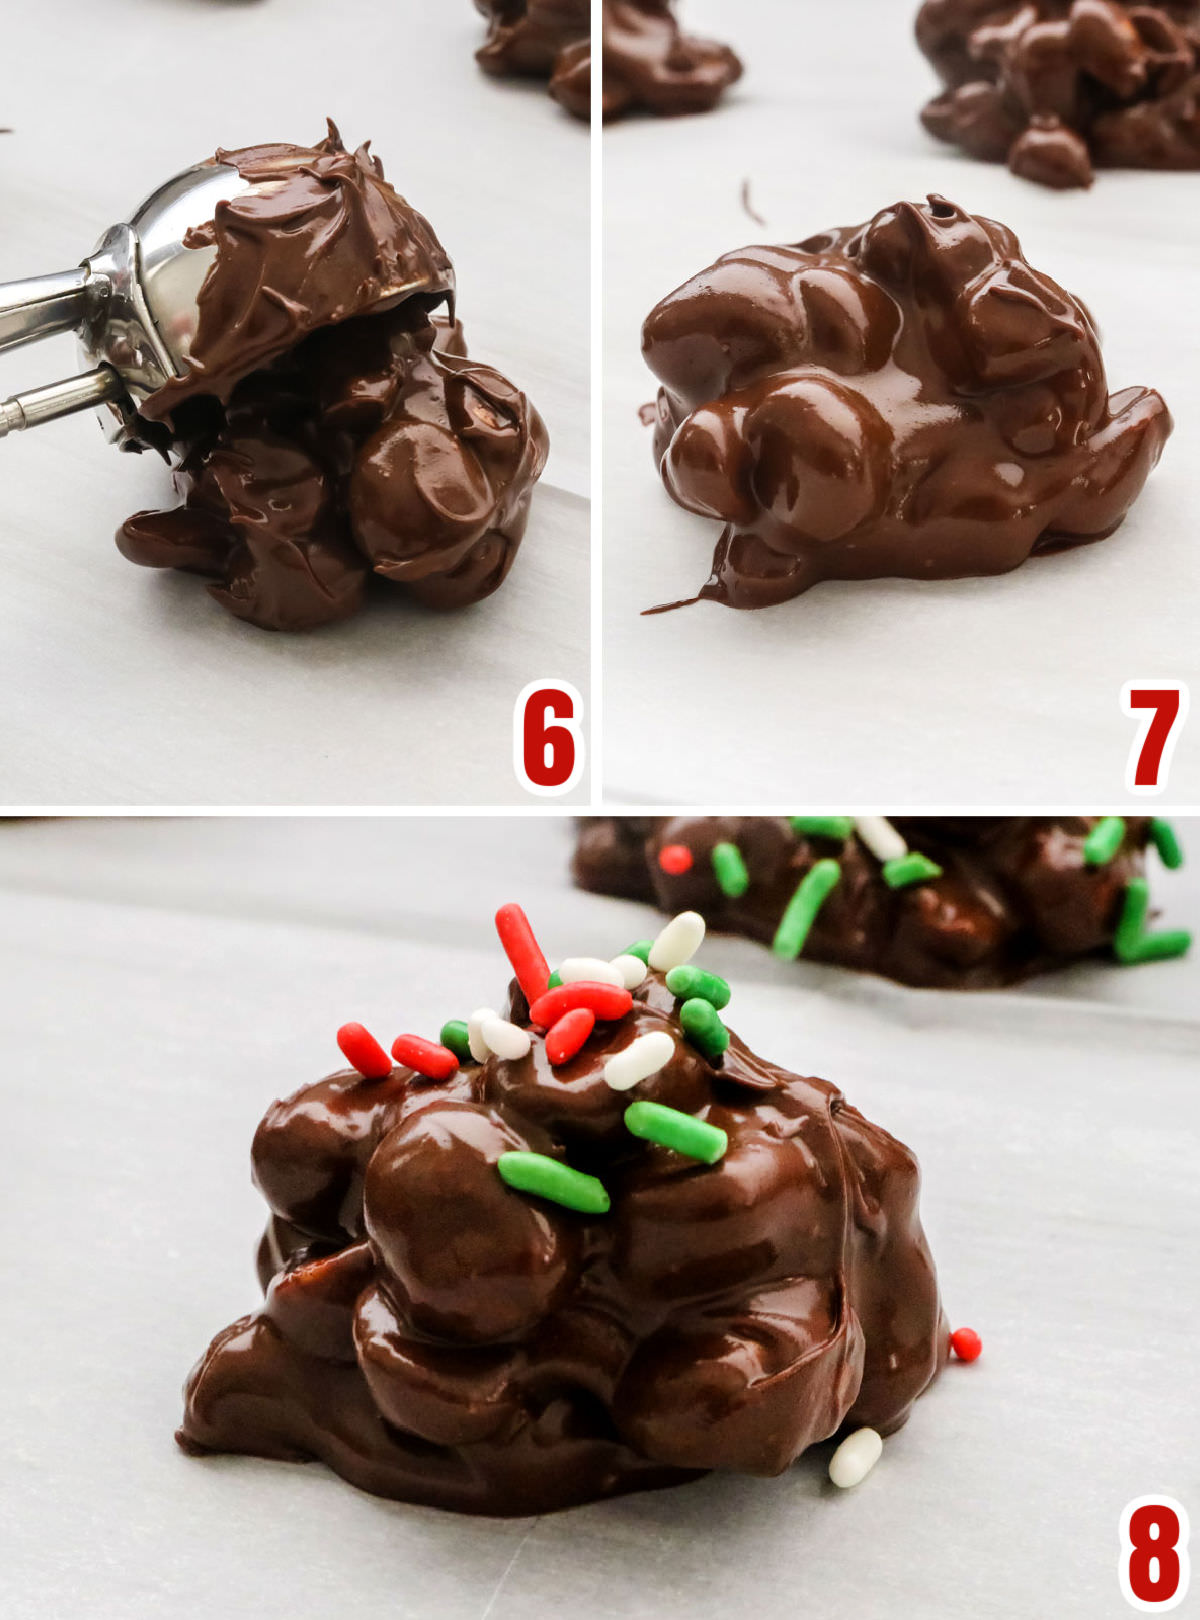 Collage image showing the steps for creating the individual chocolate peanut clusters.